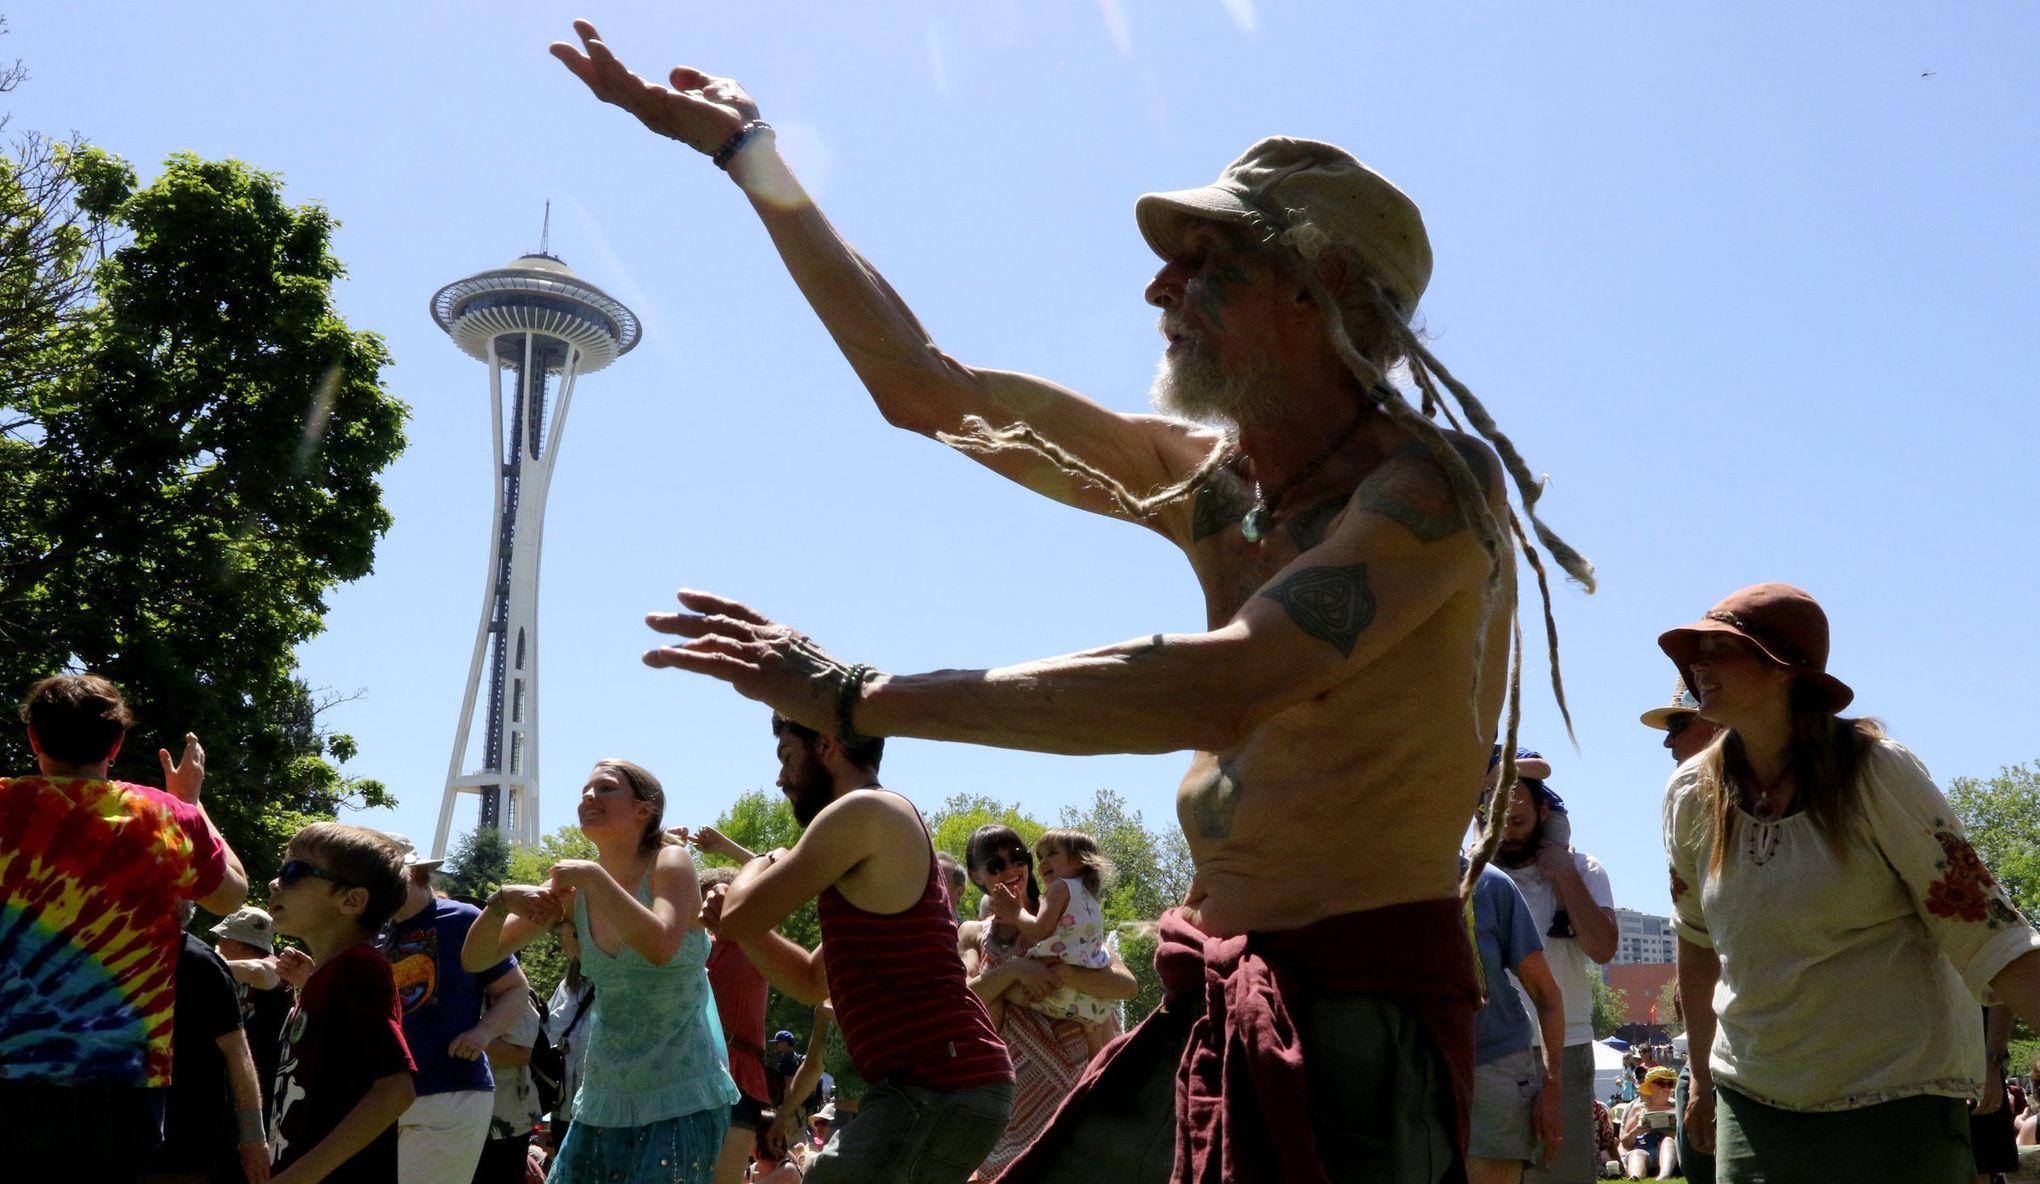 After cancellation fears, Northwest Folklife Festival organizers